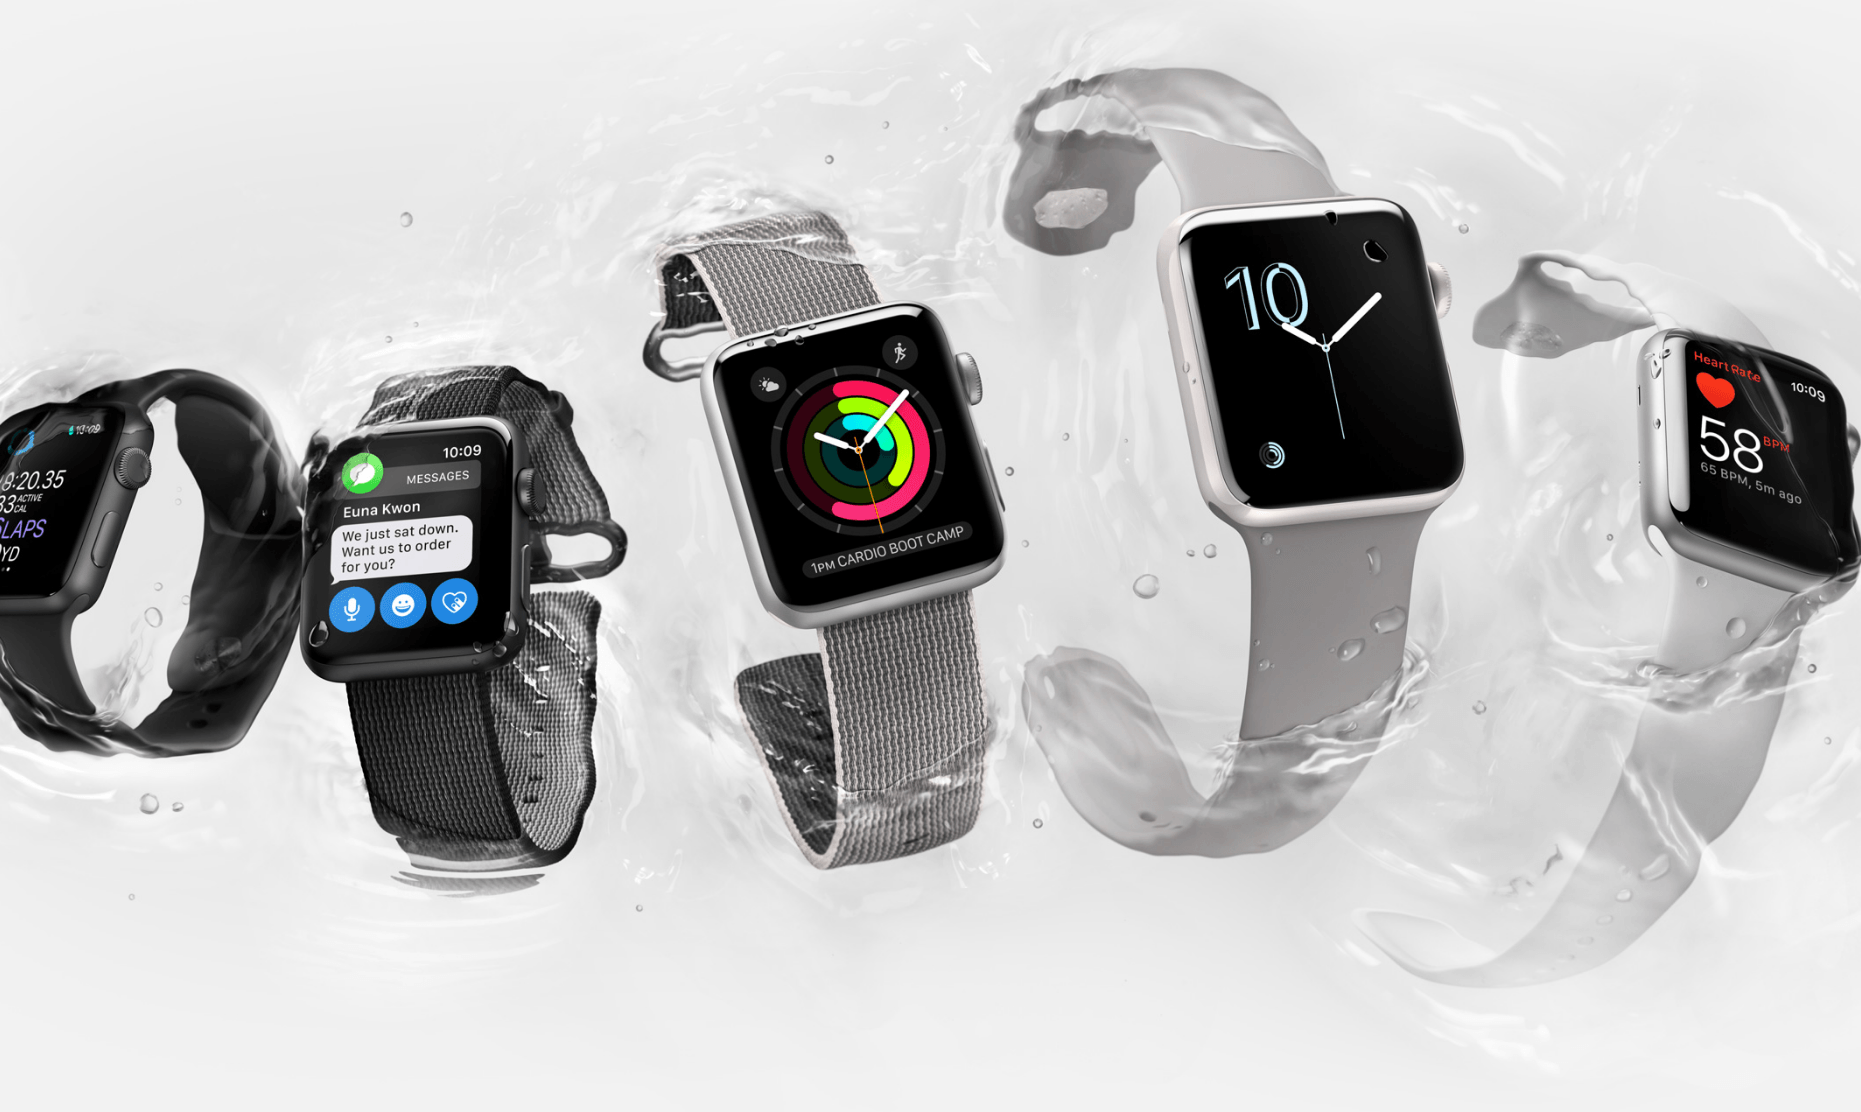 Apple Watch Series 2 has been discontinued